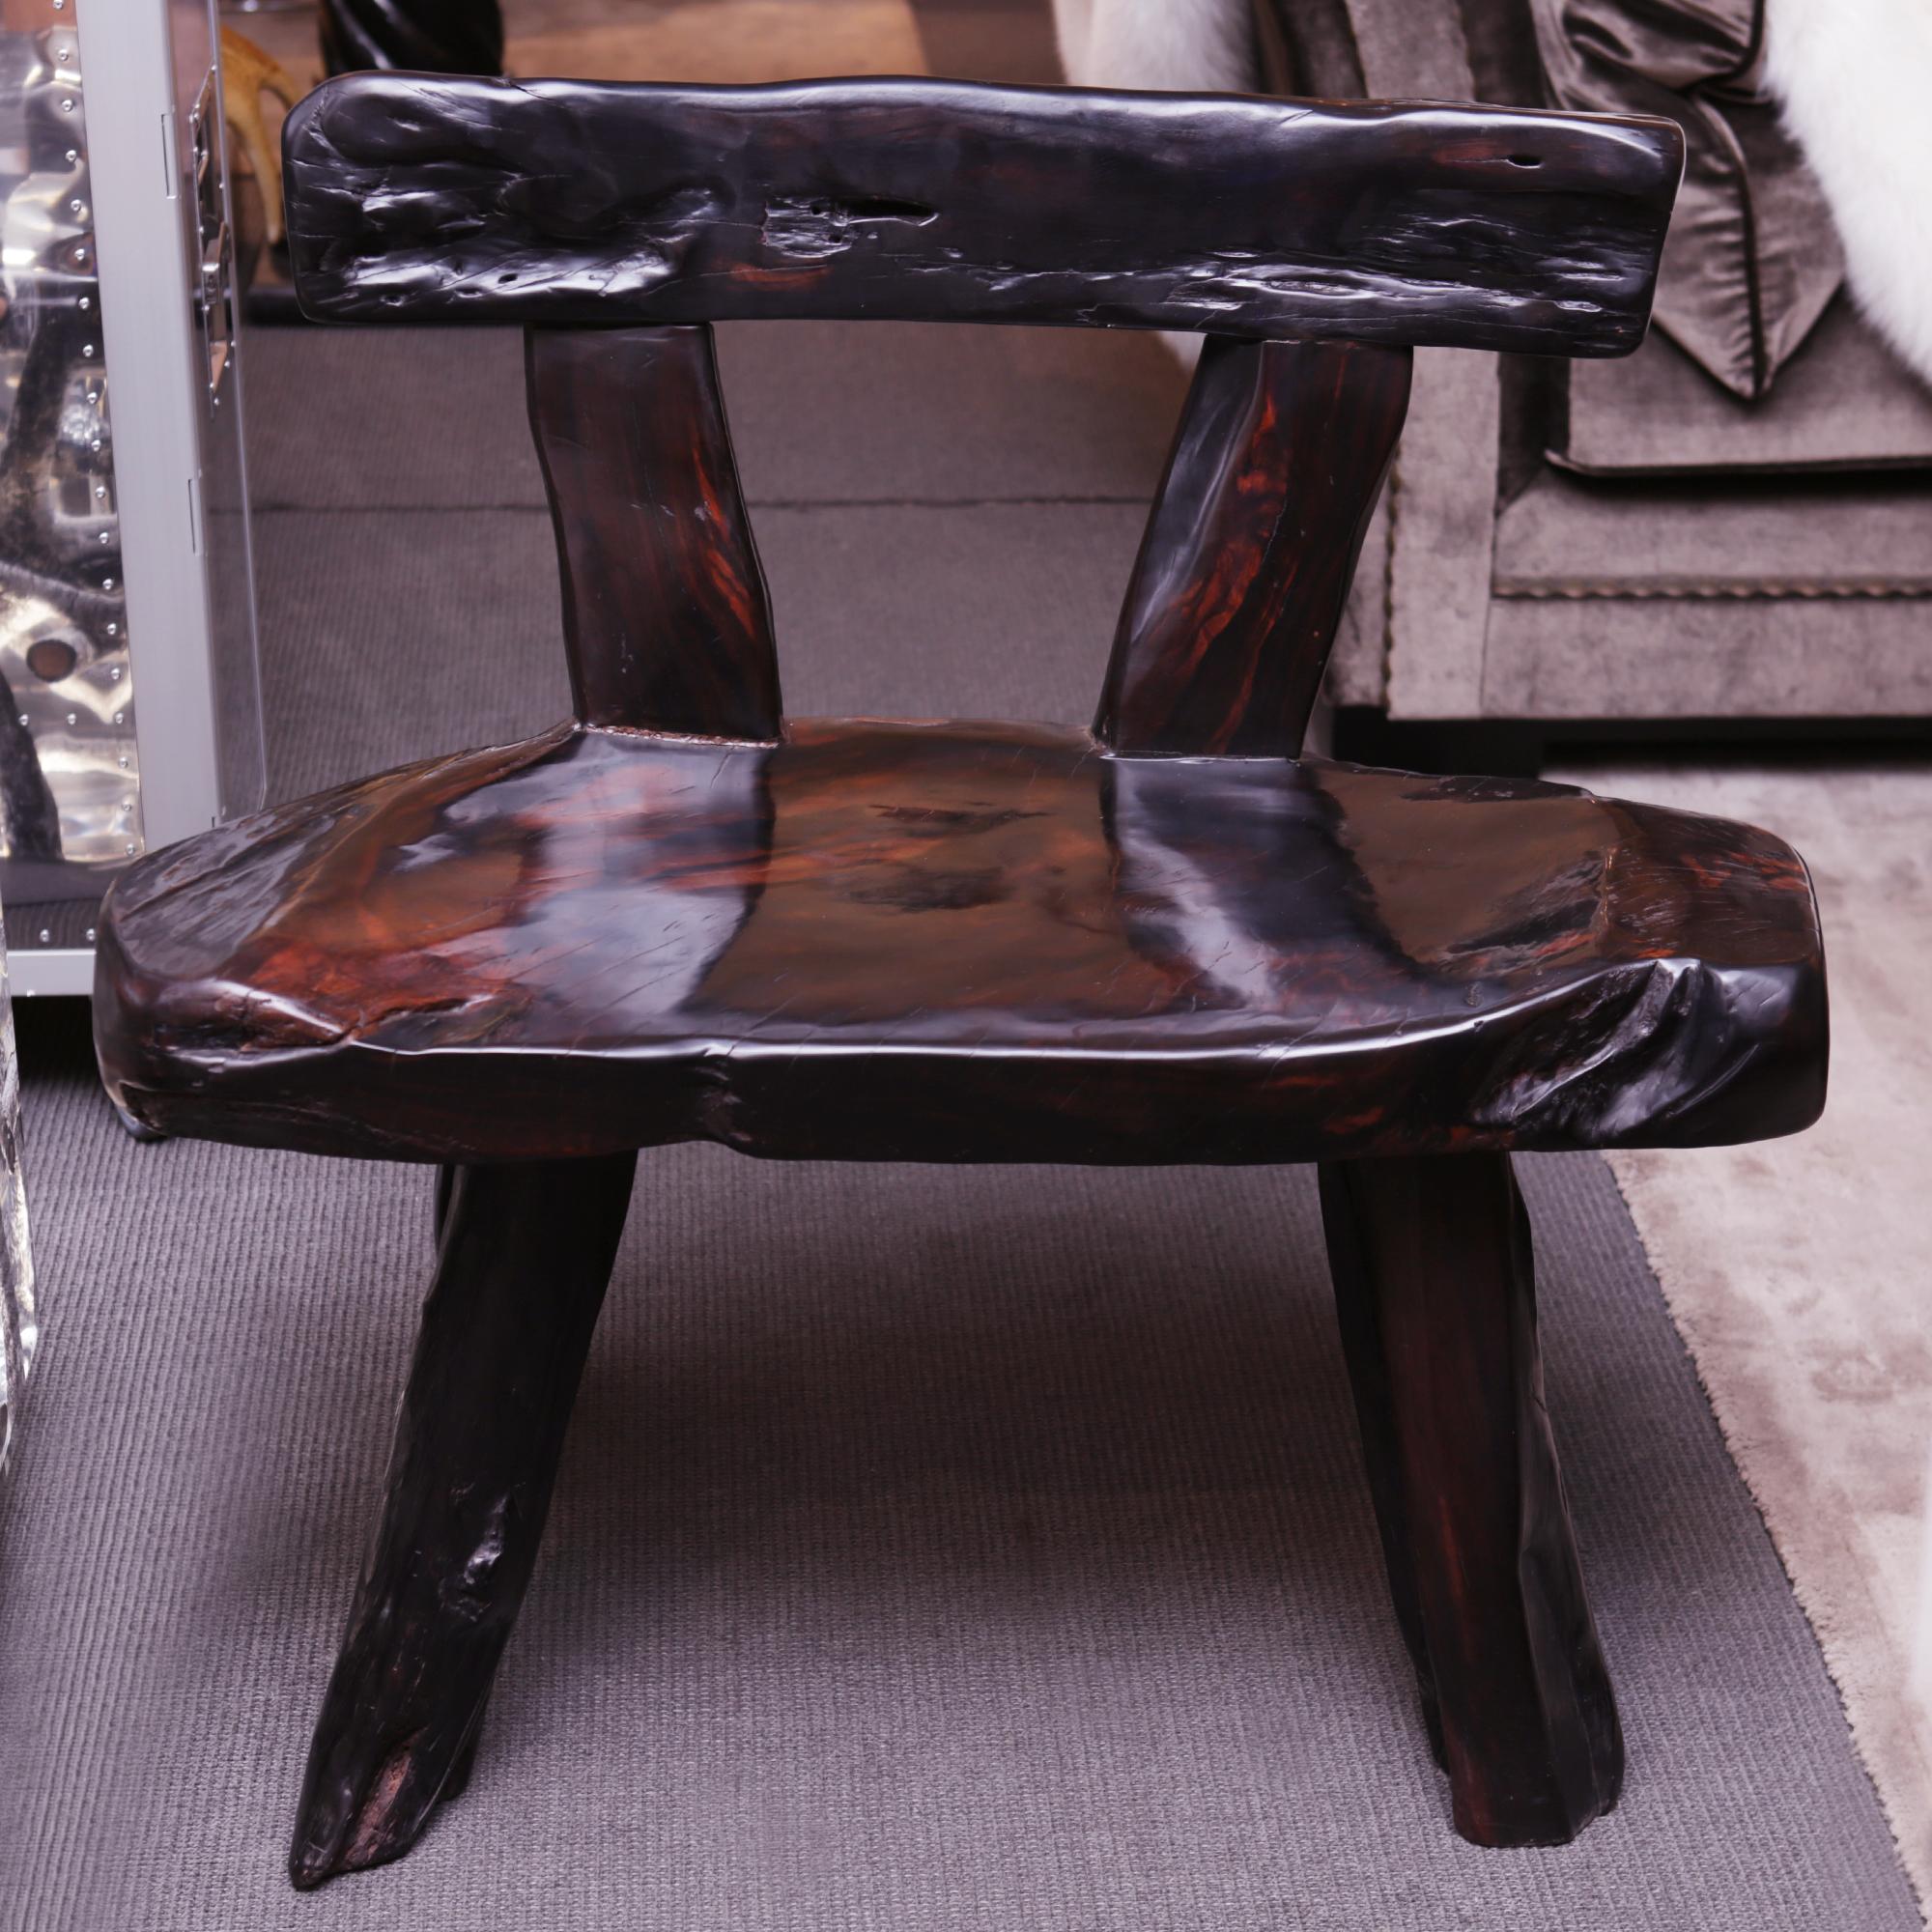 Bench ebony thick 1 in natural
solid ebony wood from Macassar.
Hand carved piece, unique and
exceptional piece.